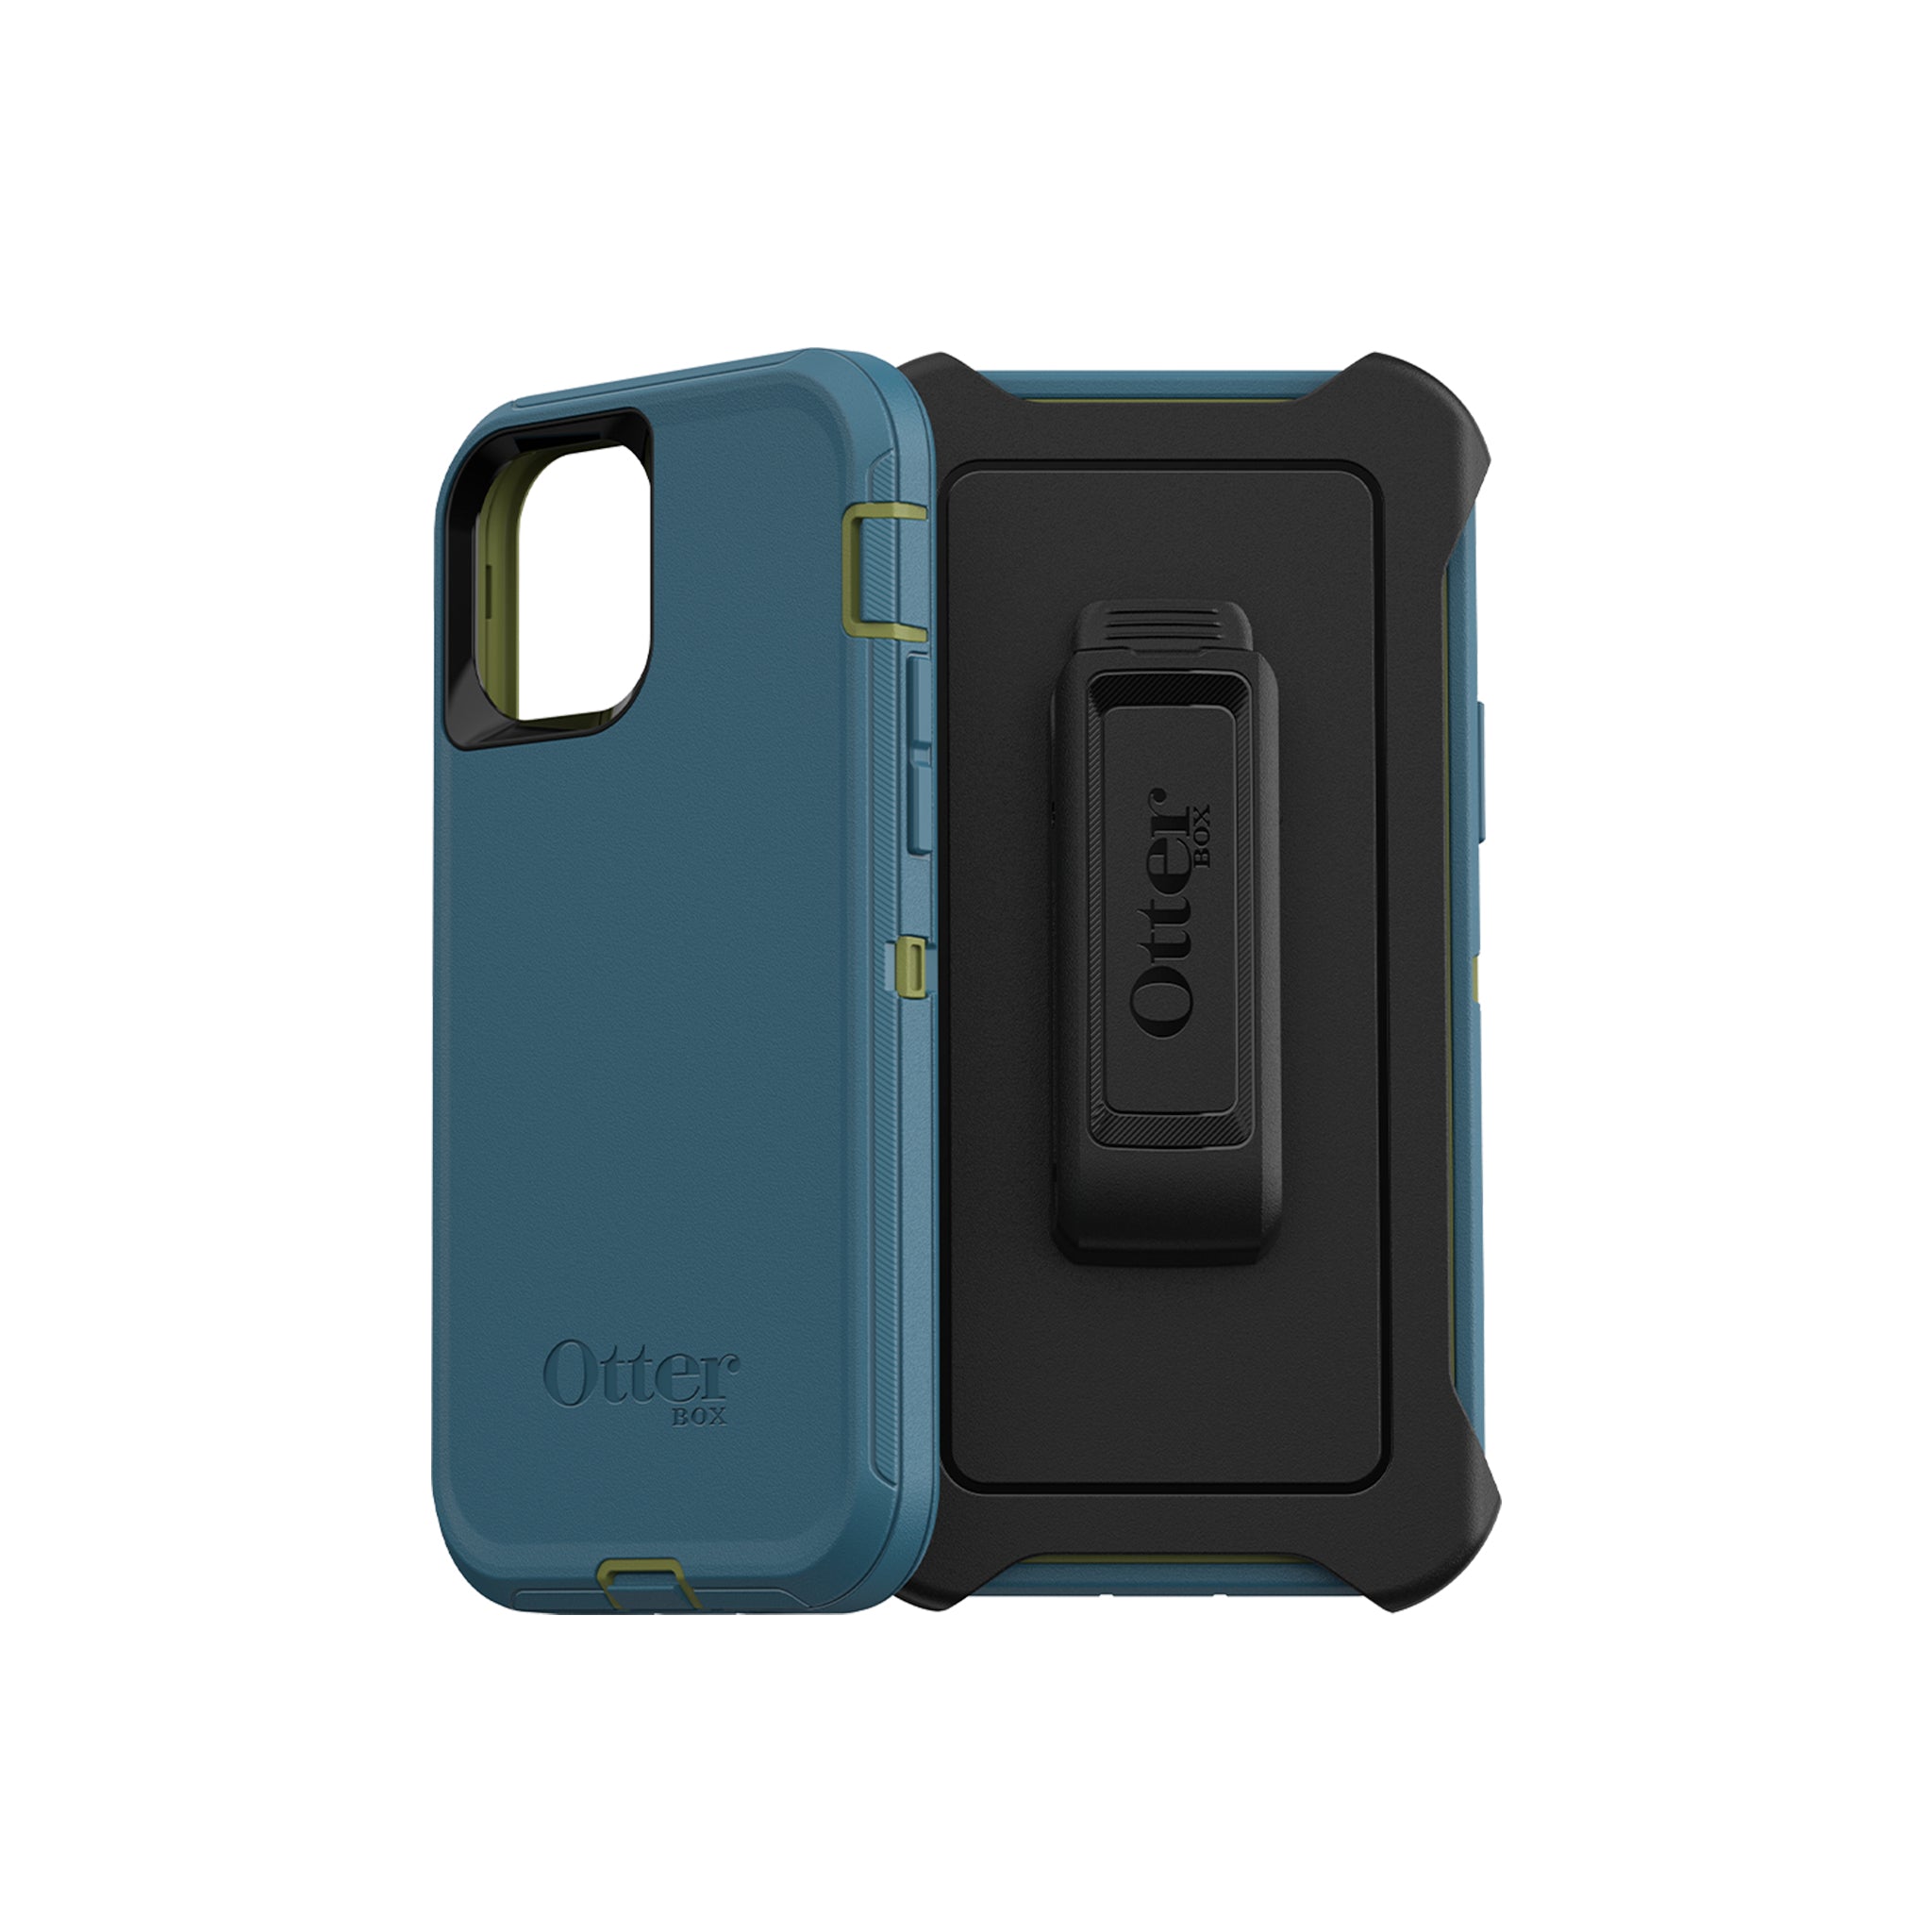 OtterBox - Defender for iPhone 12 / 12 Pro - Teal me About It